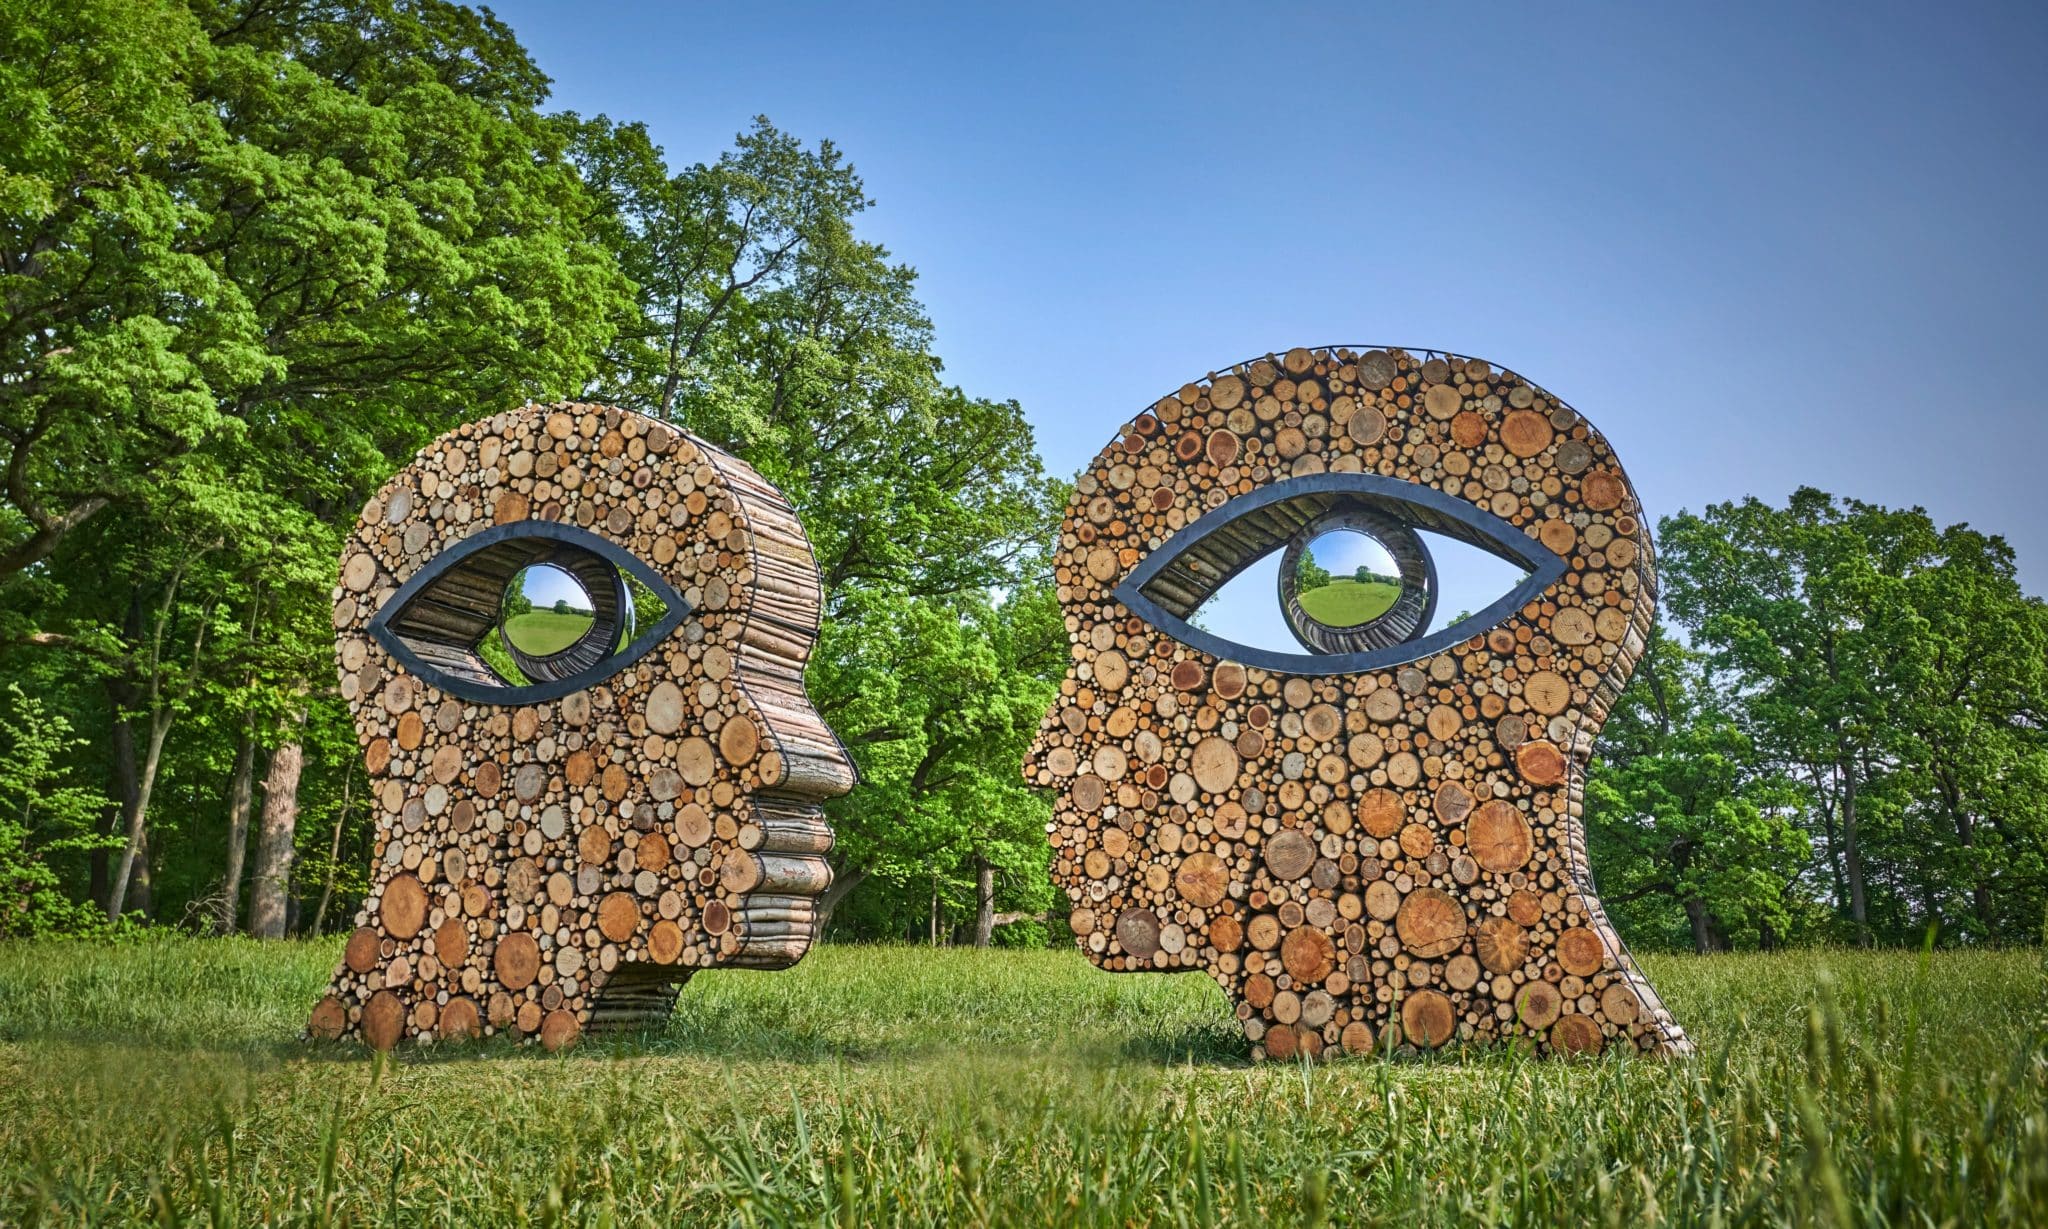 sculpture of the “Oculus” sculpture with two large heads and eyes for the brains at the Morton Arboretum in Chicago for the new "Of the Earth" exhibition